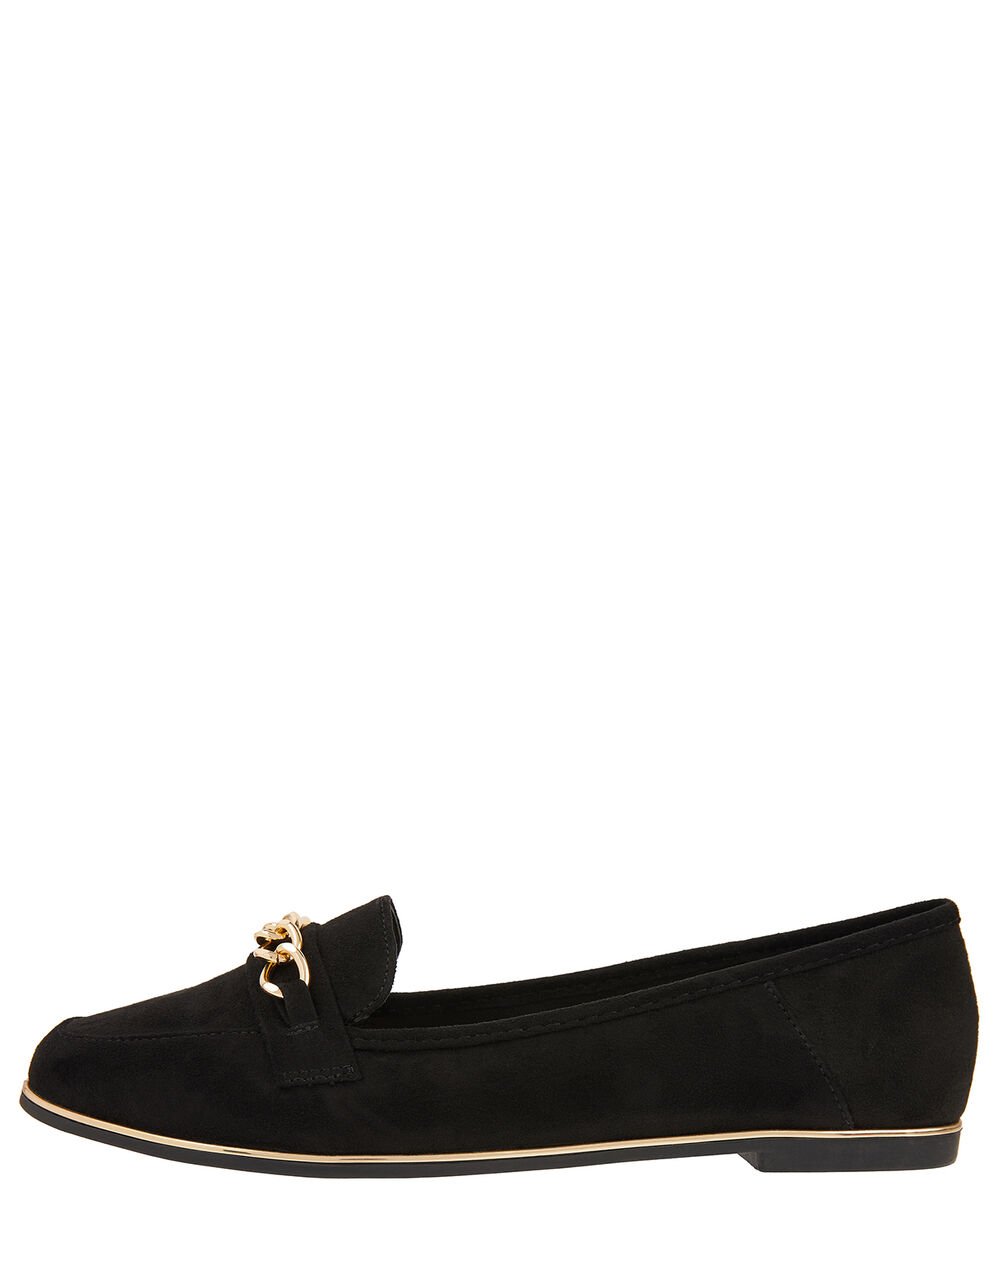 Chain Loafer Shoes Black | Flat shoes | Accessorize UK